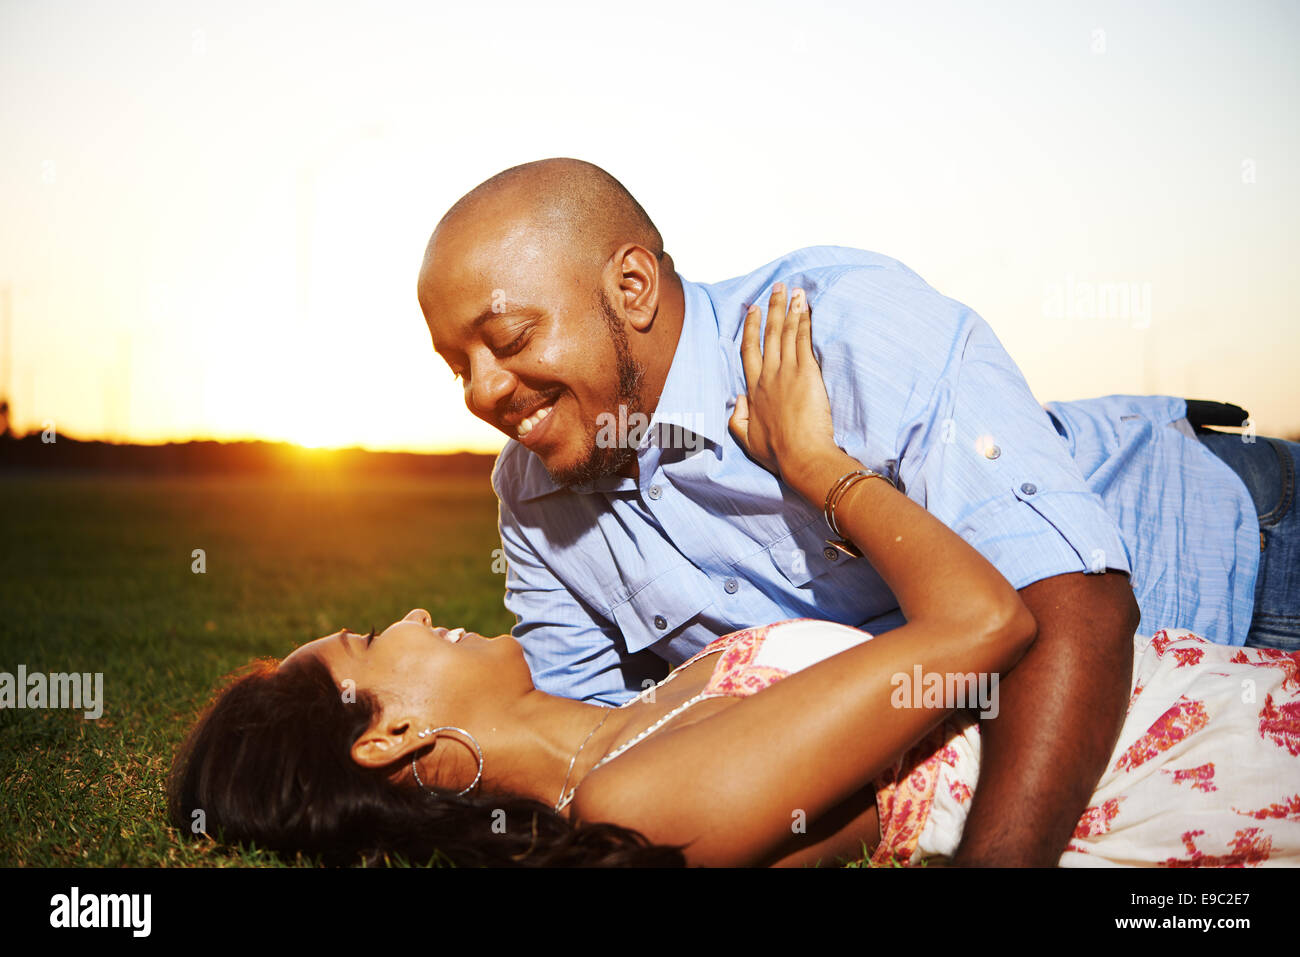 Coupling laying in grass during sunset laughing Stock Photo